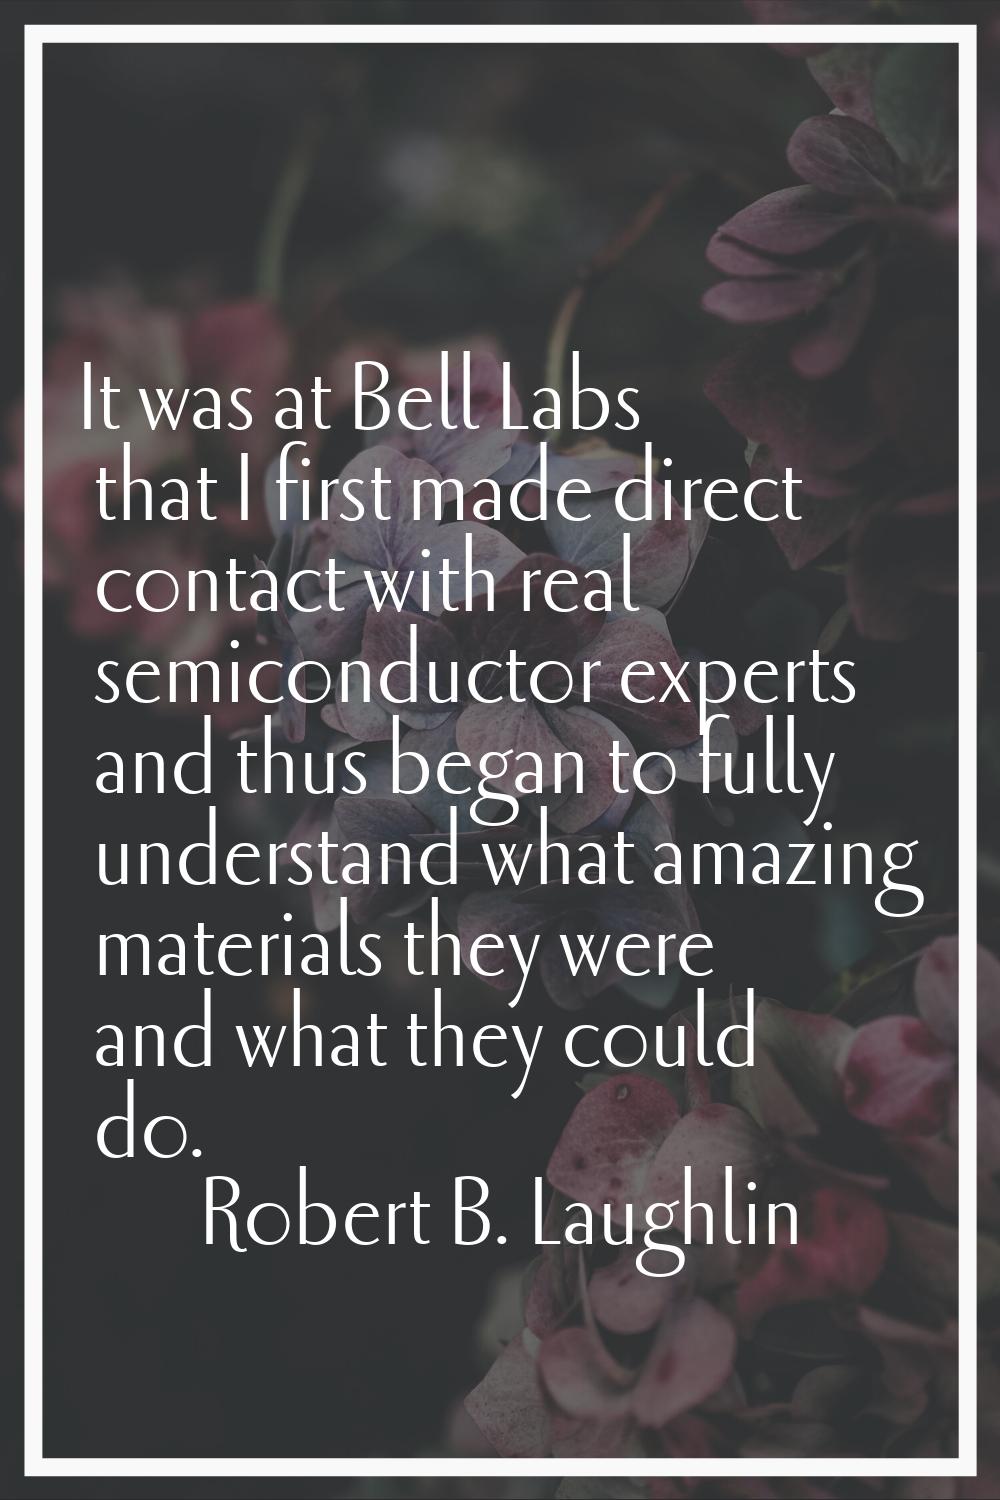 It was at Bell Labs that I first made direct contact with real semiconductor experts and thus began